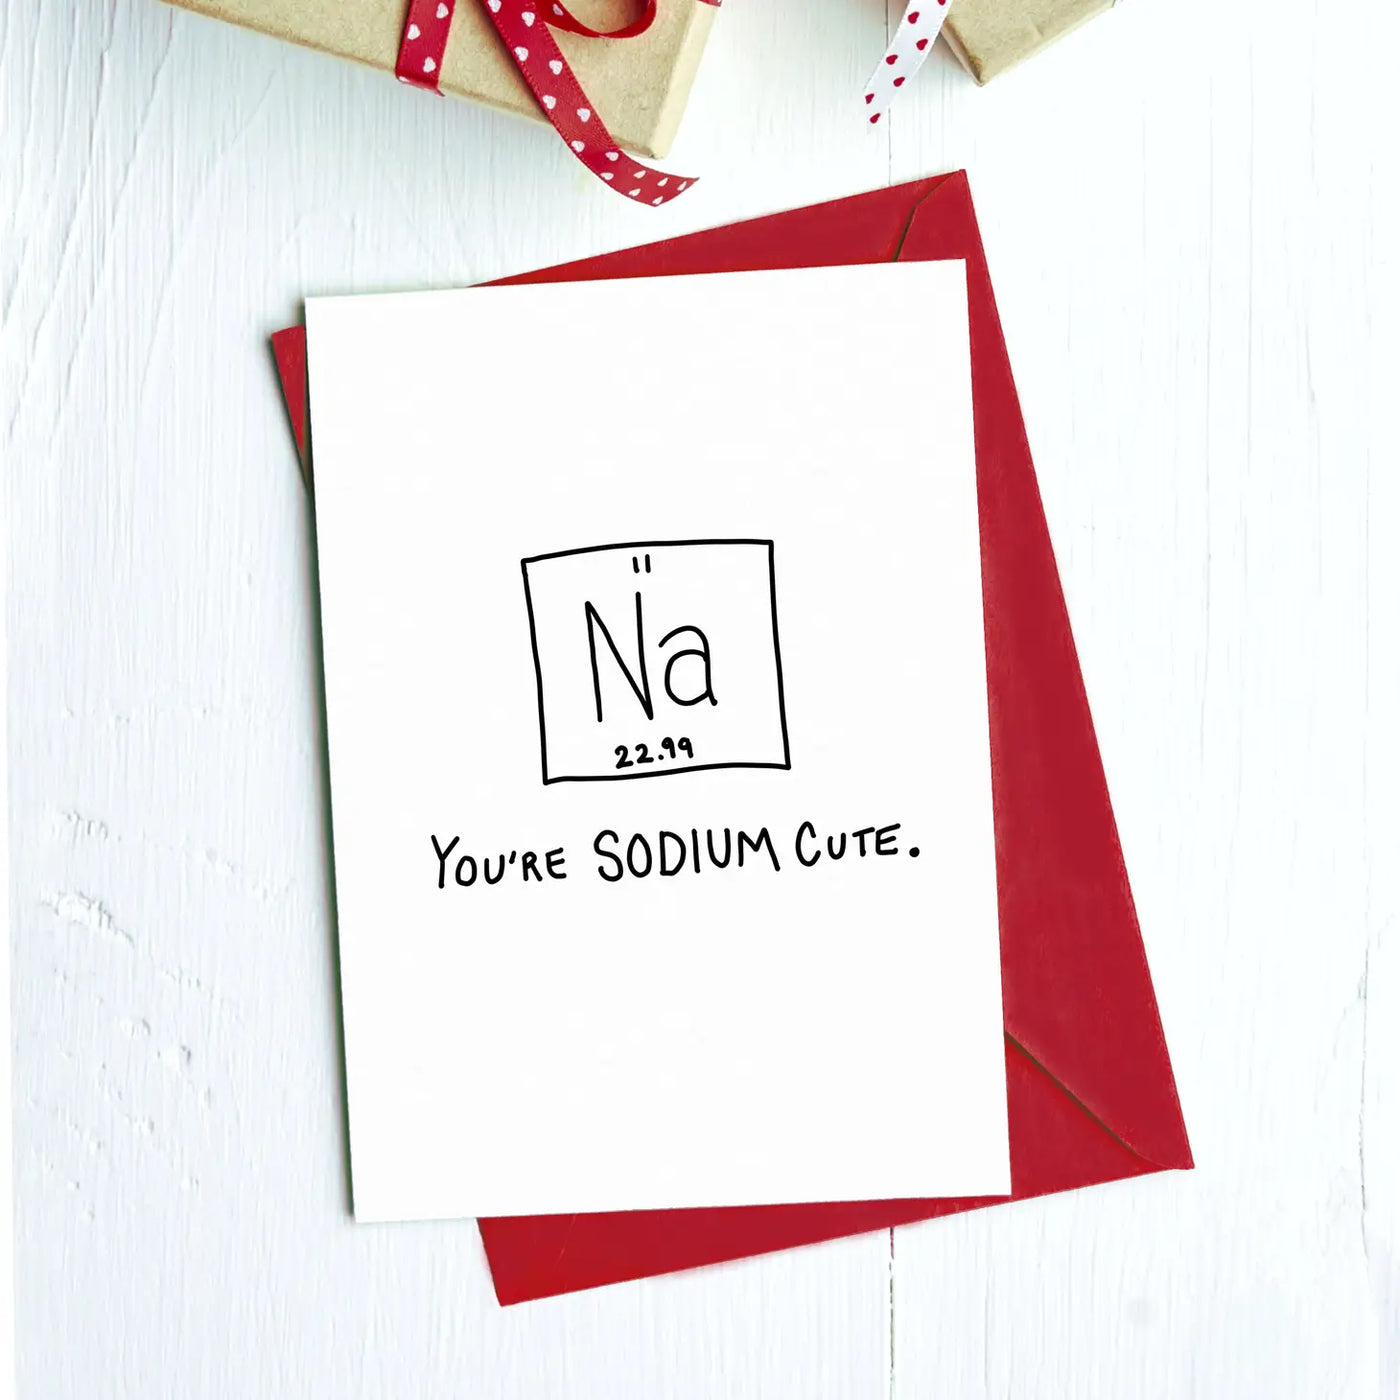 Cute nerdy science chemistry card valentine's galentines card greeting gift thinking of you card woman-owned made in the USA small business boutique women's clothing